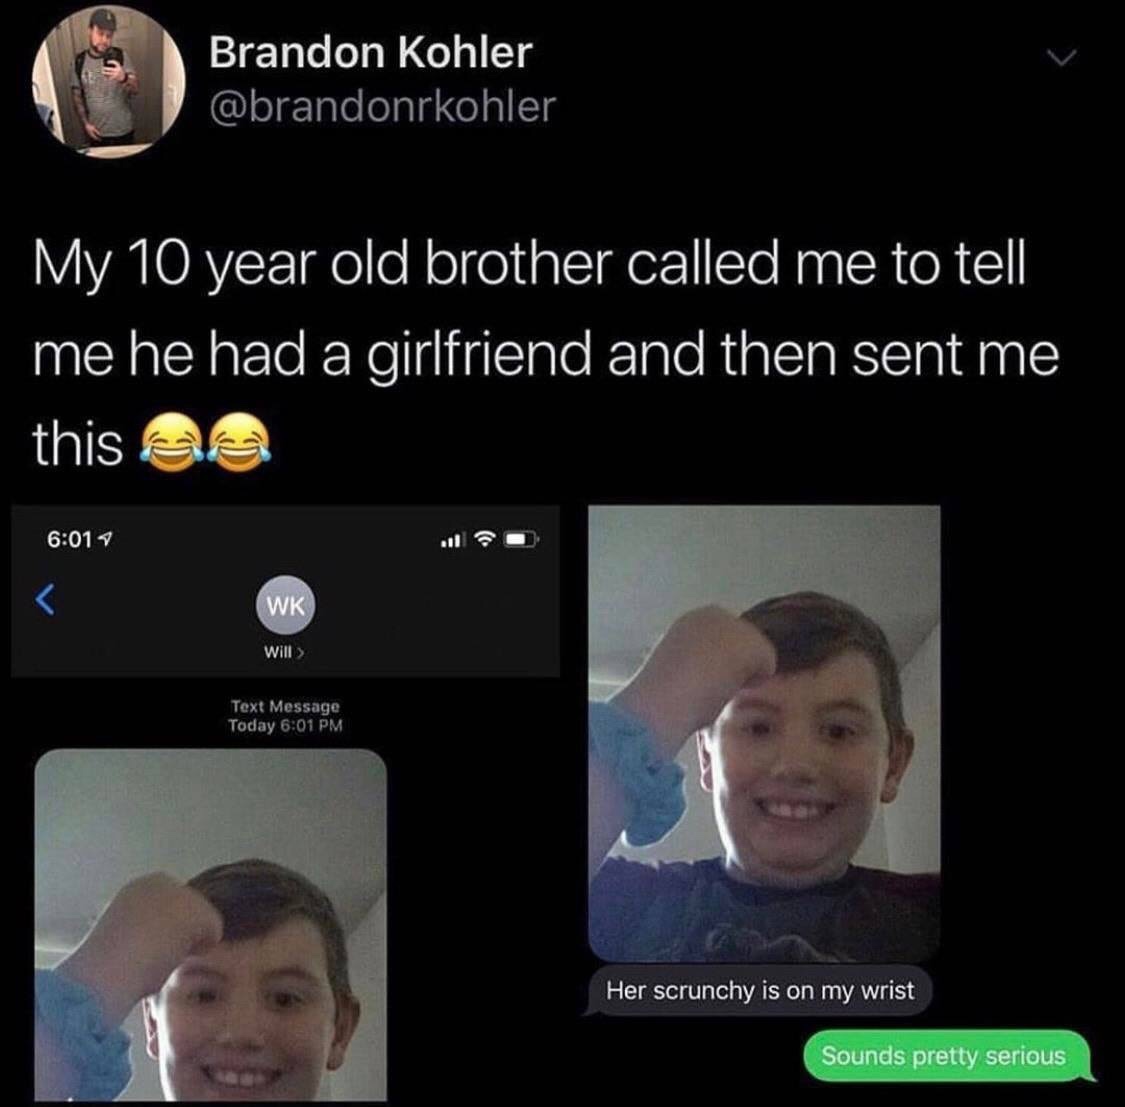 photo caption - Brandon Kohler My 10 year old brother called me to tell me he had a girlfriend and then sent me this Ba Wk Will Text Message Today Her scrunchy is on my wrist Sounds pretty serious